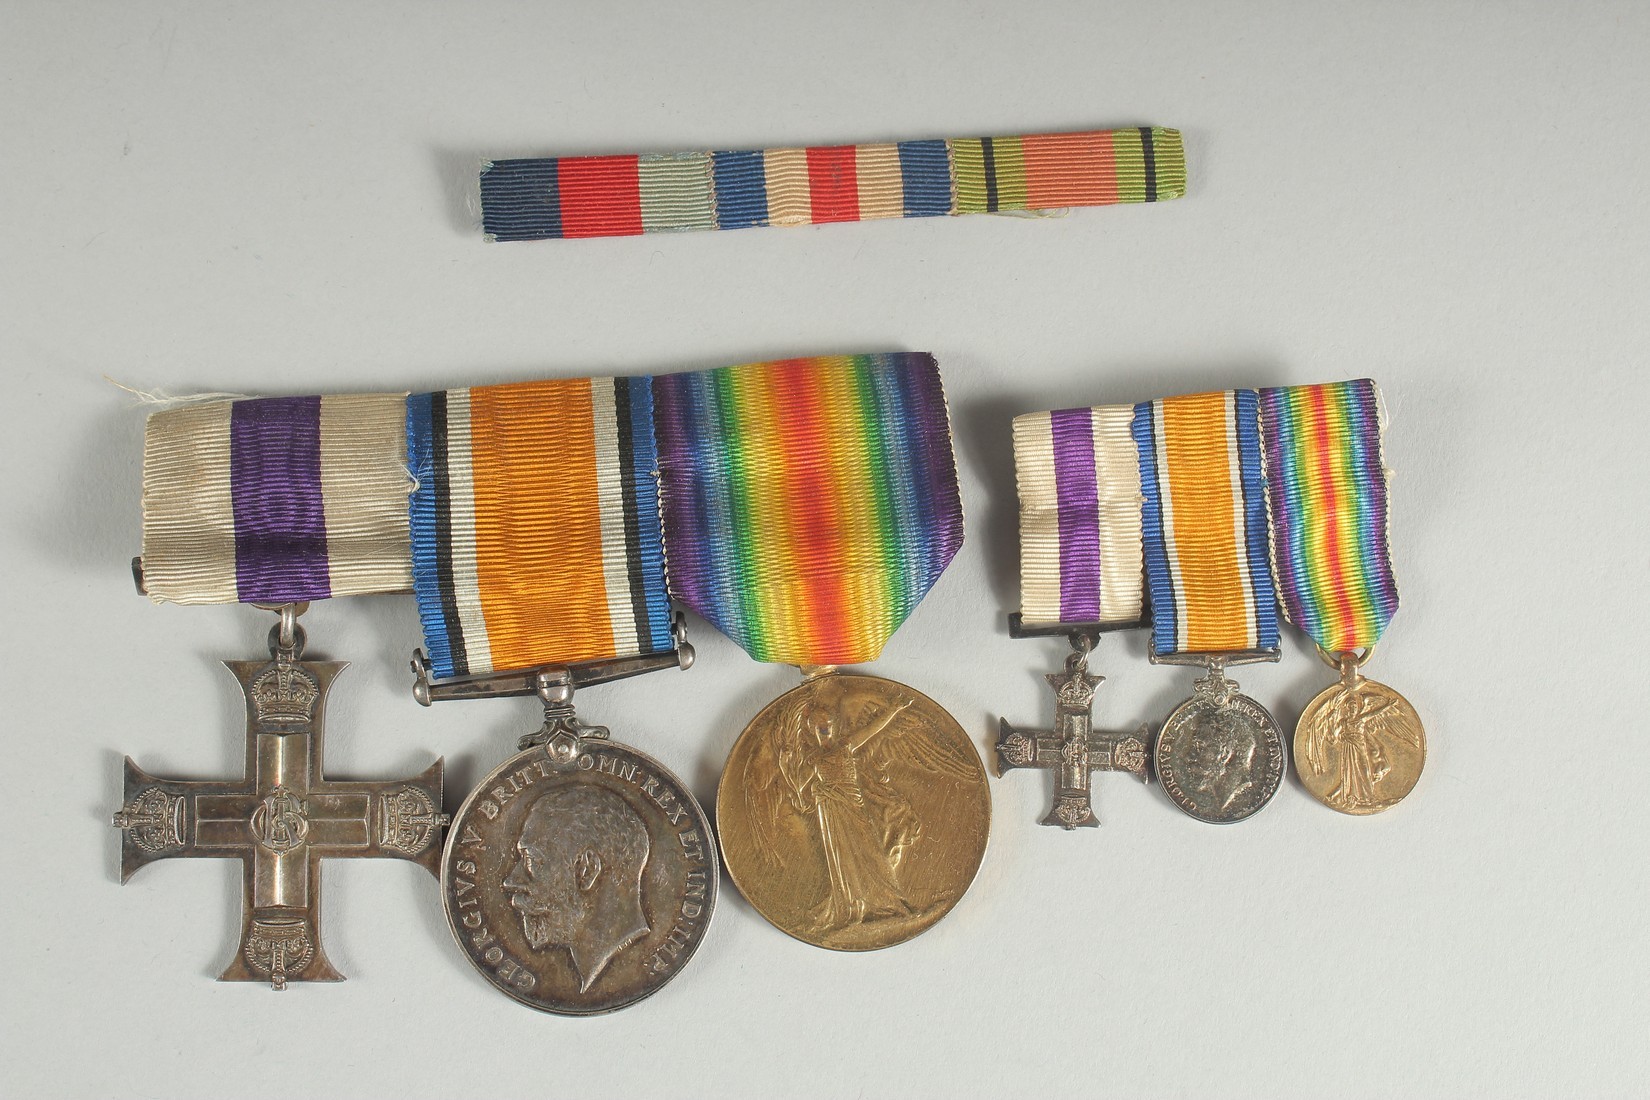 CAPTAIN J. SCOTT. MILITARY CROSS. 1914 - 1918 WAR MEDAL AND VICTORIA MEDAL, plus a set of three